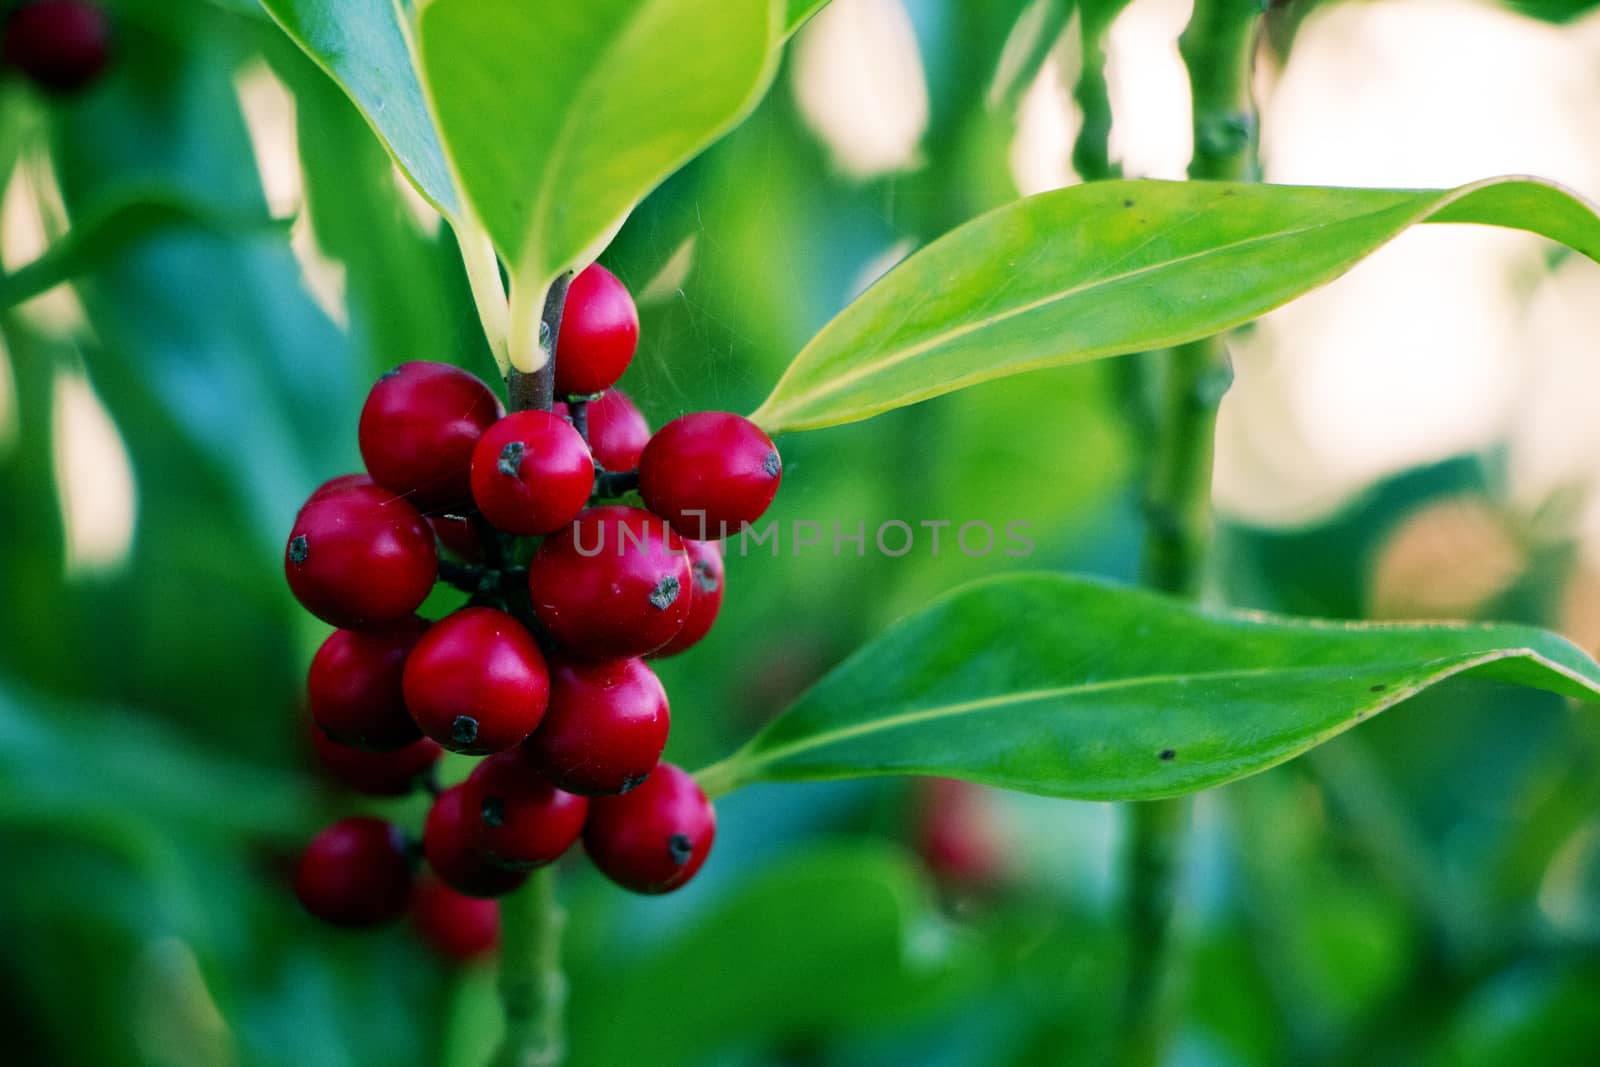 Small red berries on plant with green leaves in autumn.